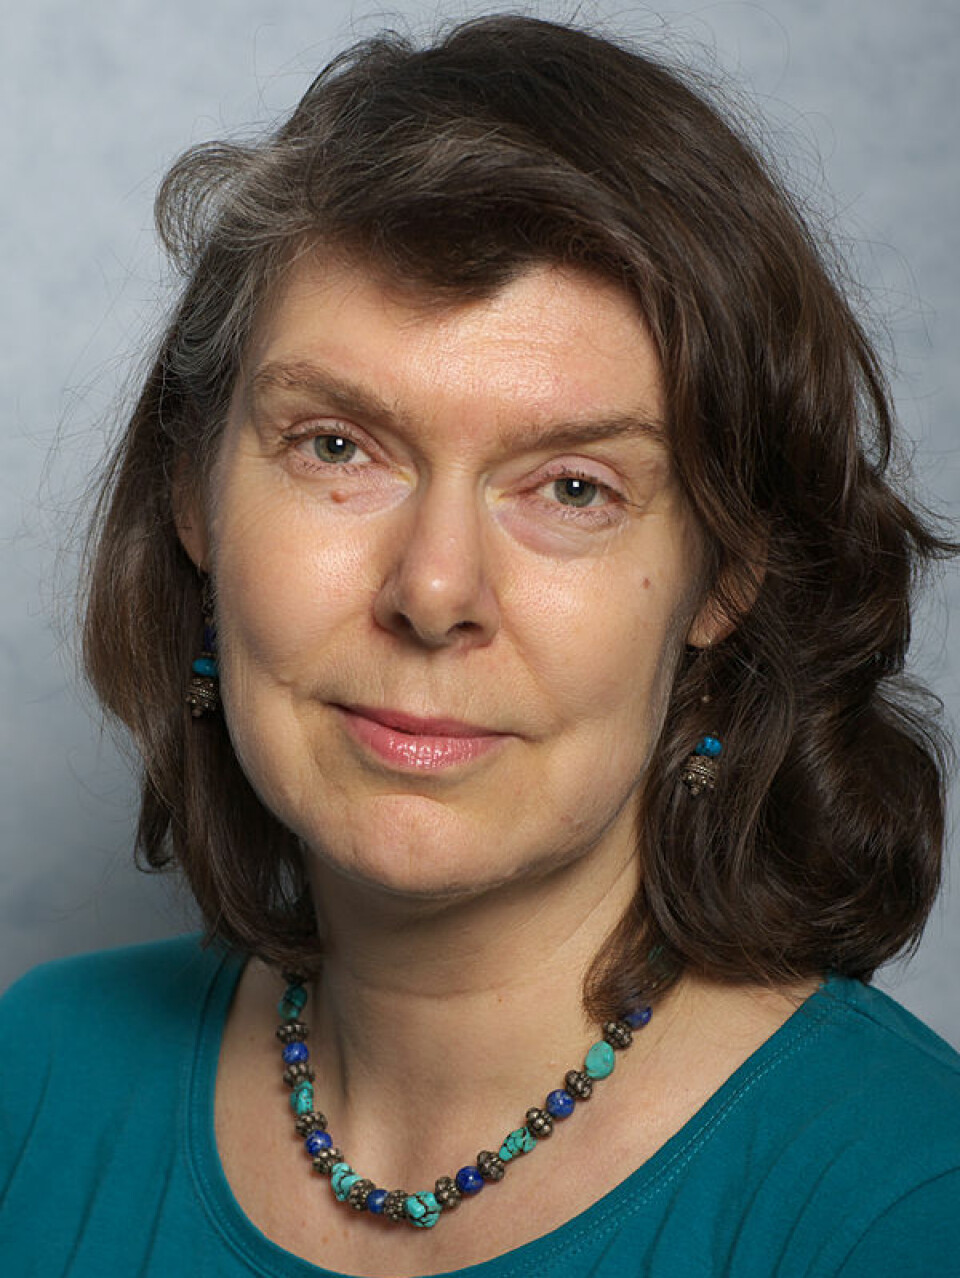 Helle Margrete Meltzer is a dietitian, member of Norway’s National Nutrition Council and former head of research at Norwegian Institute of Public Health.